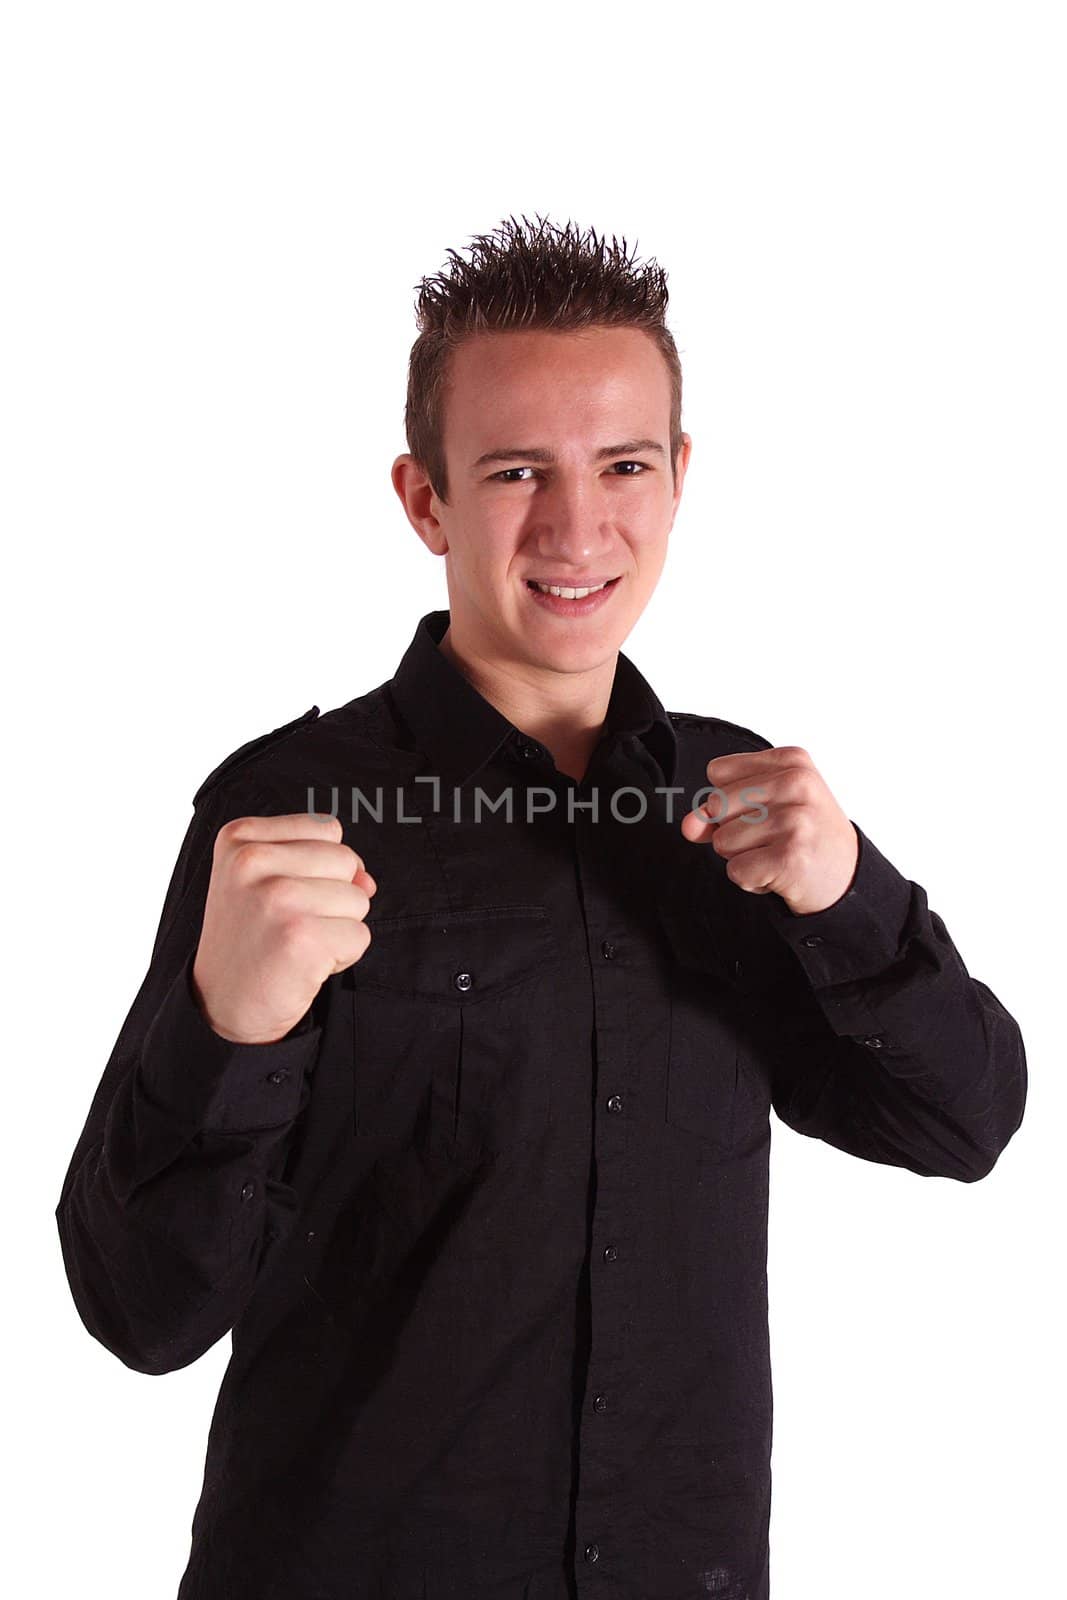 A young man getting ready for battle. Allisolated on white background.